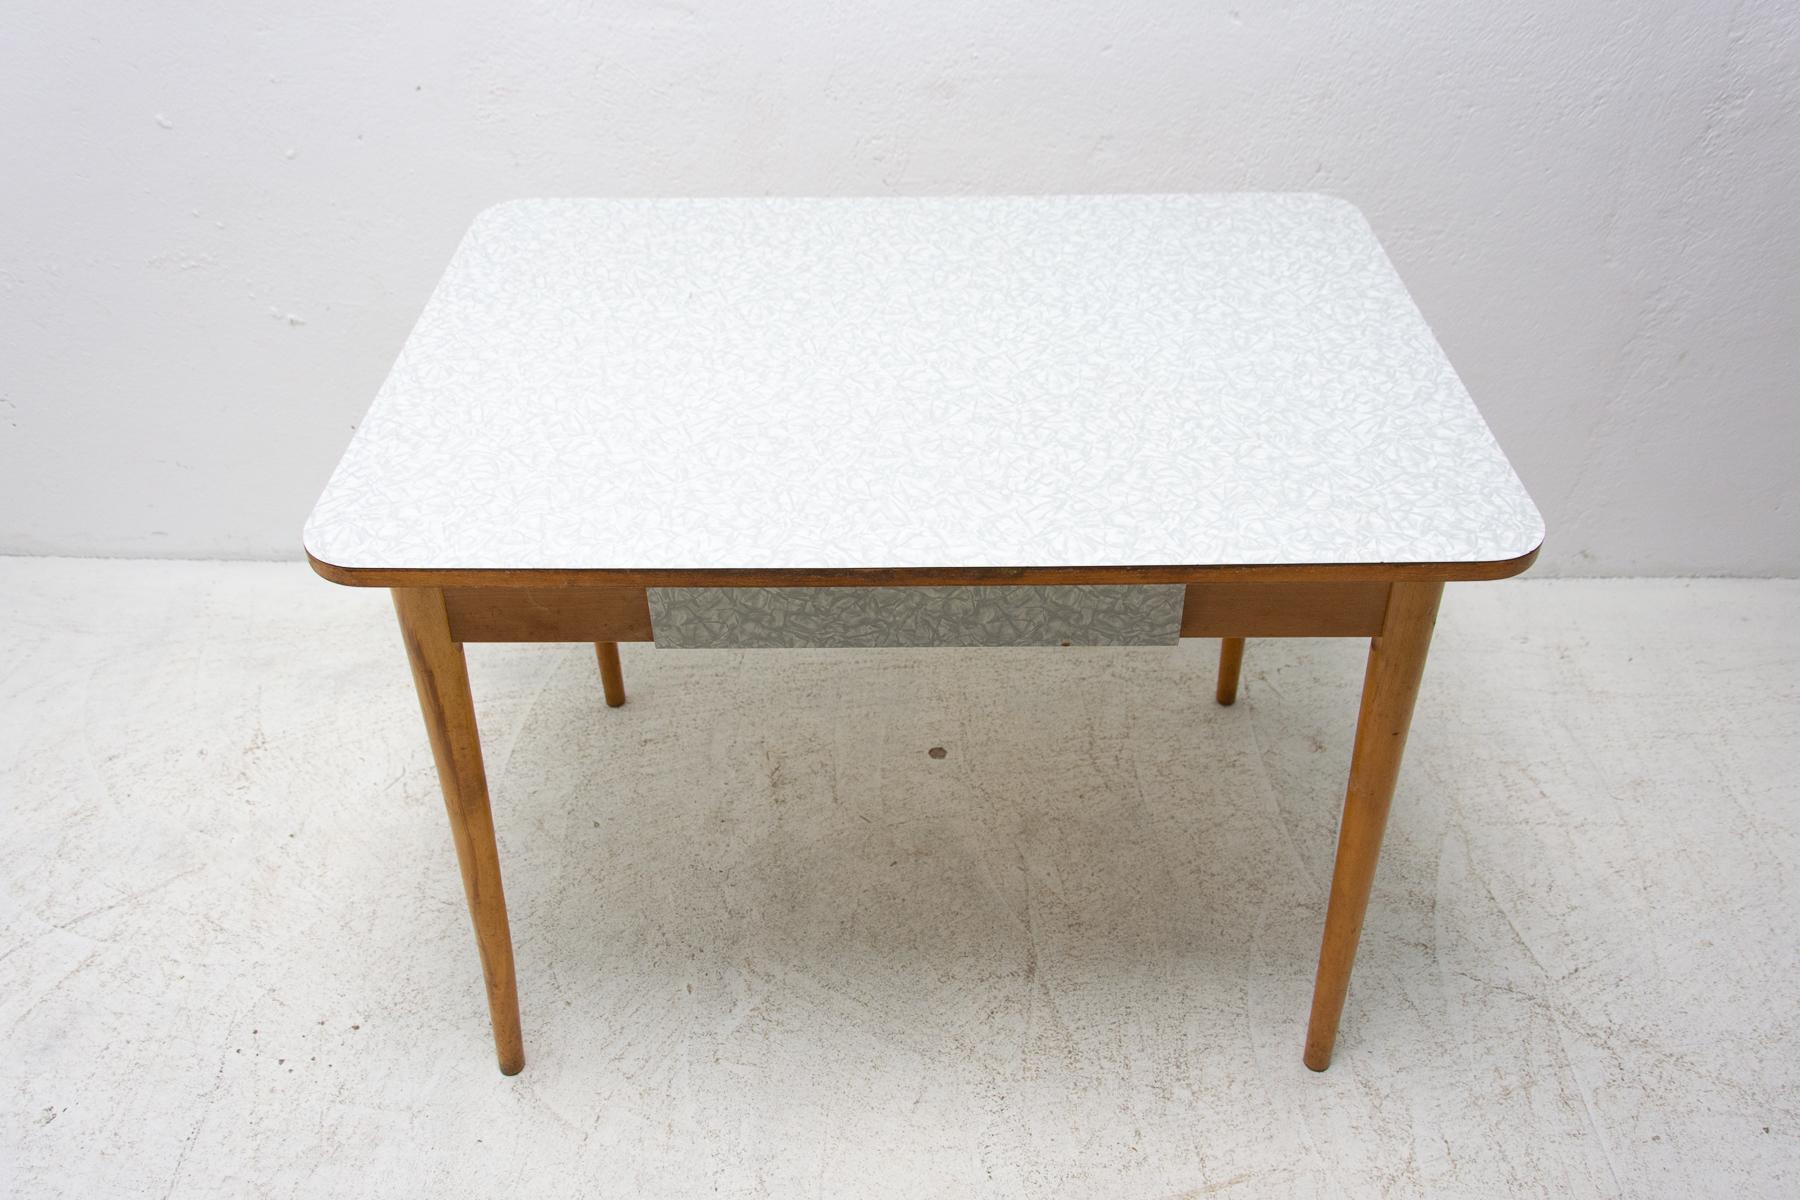  Midcentury Formica and Wood Central Table, Czechoslovakia, 1960's For Sale 3